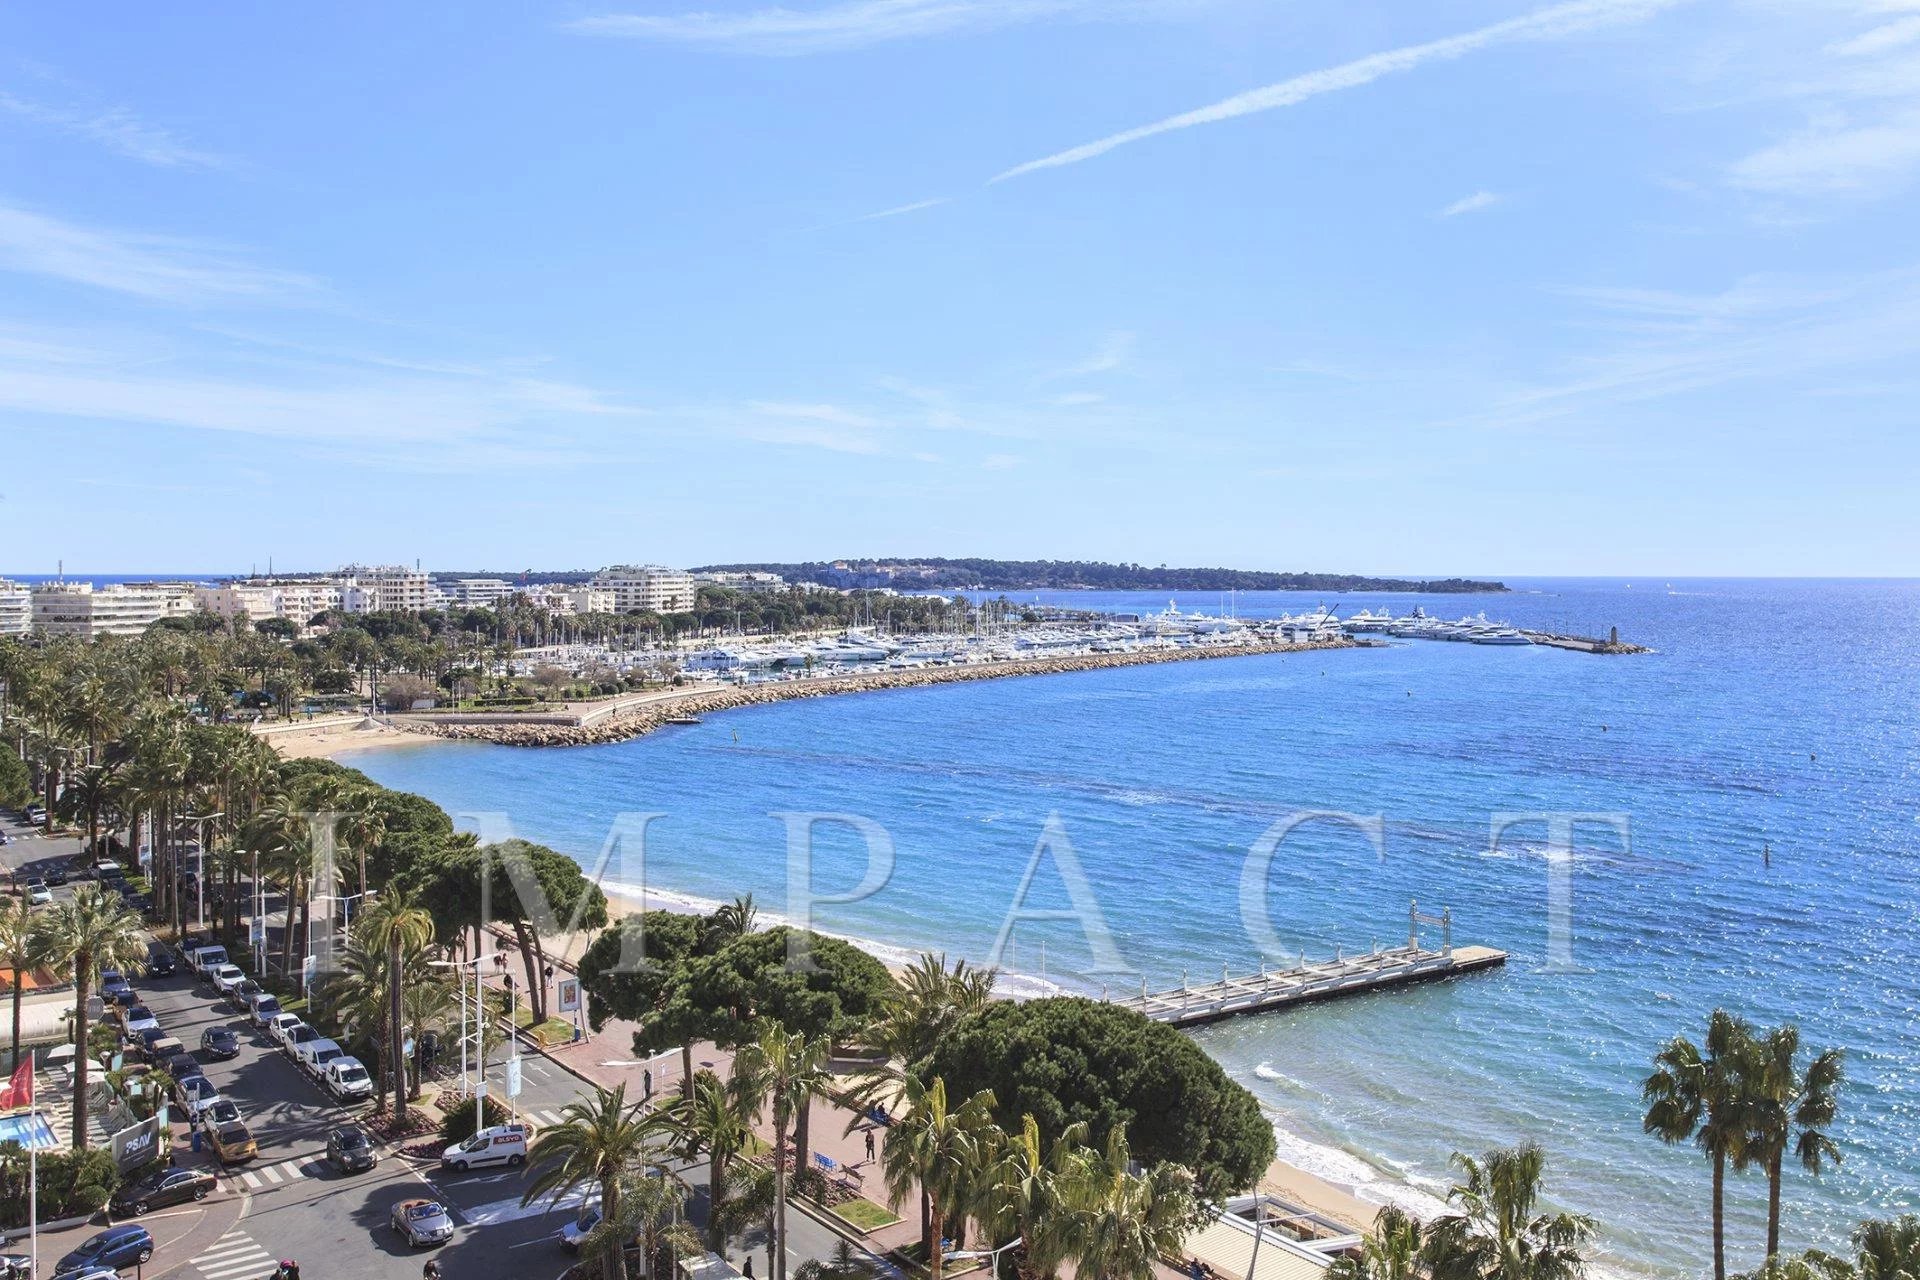 Penthouse to rent on the Croisette in Cannes